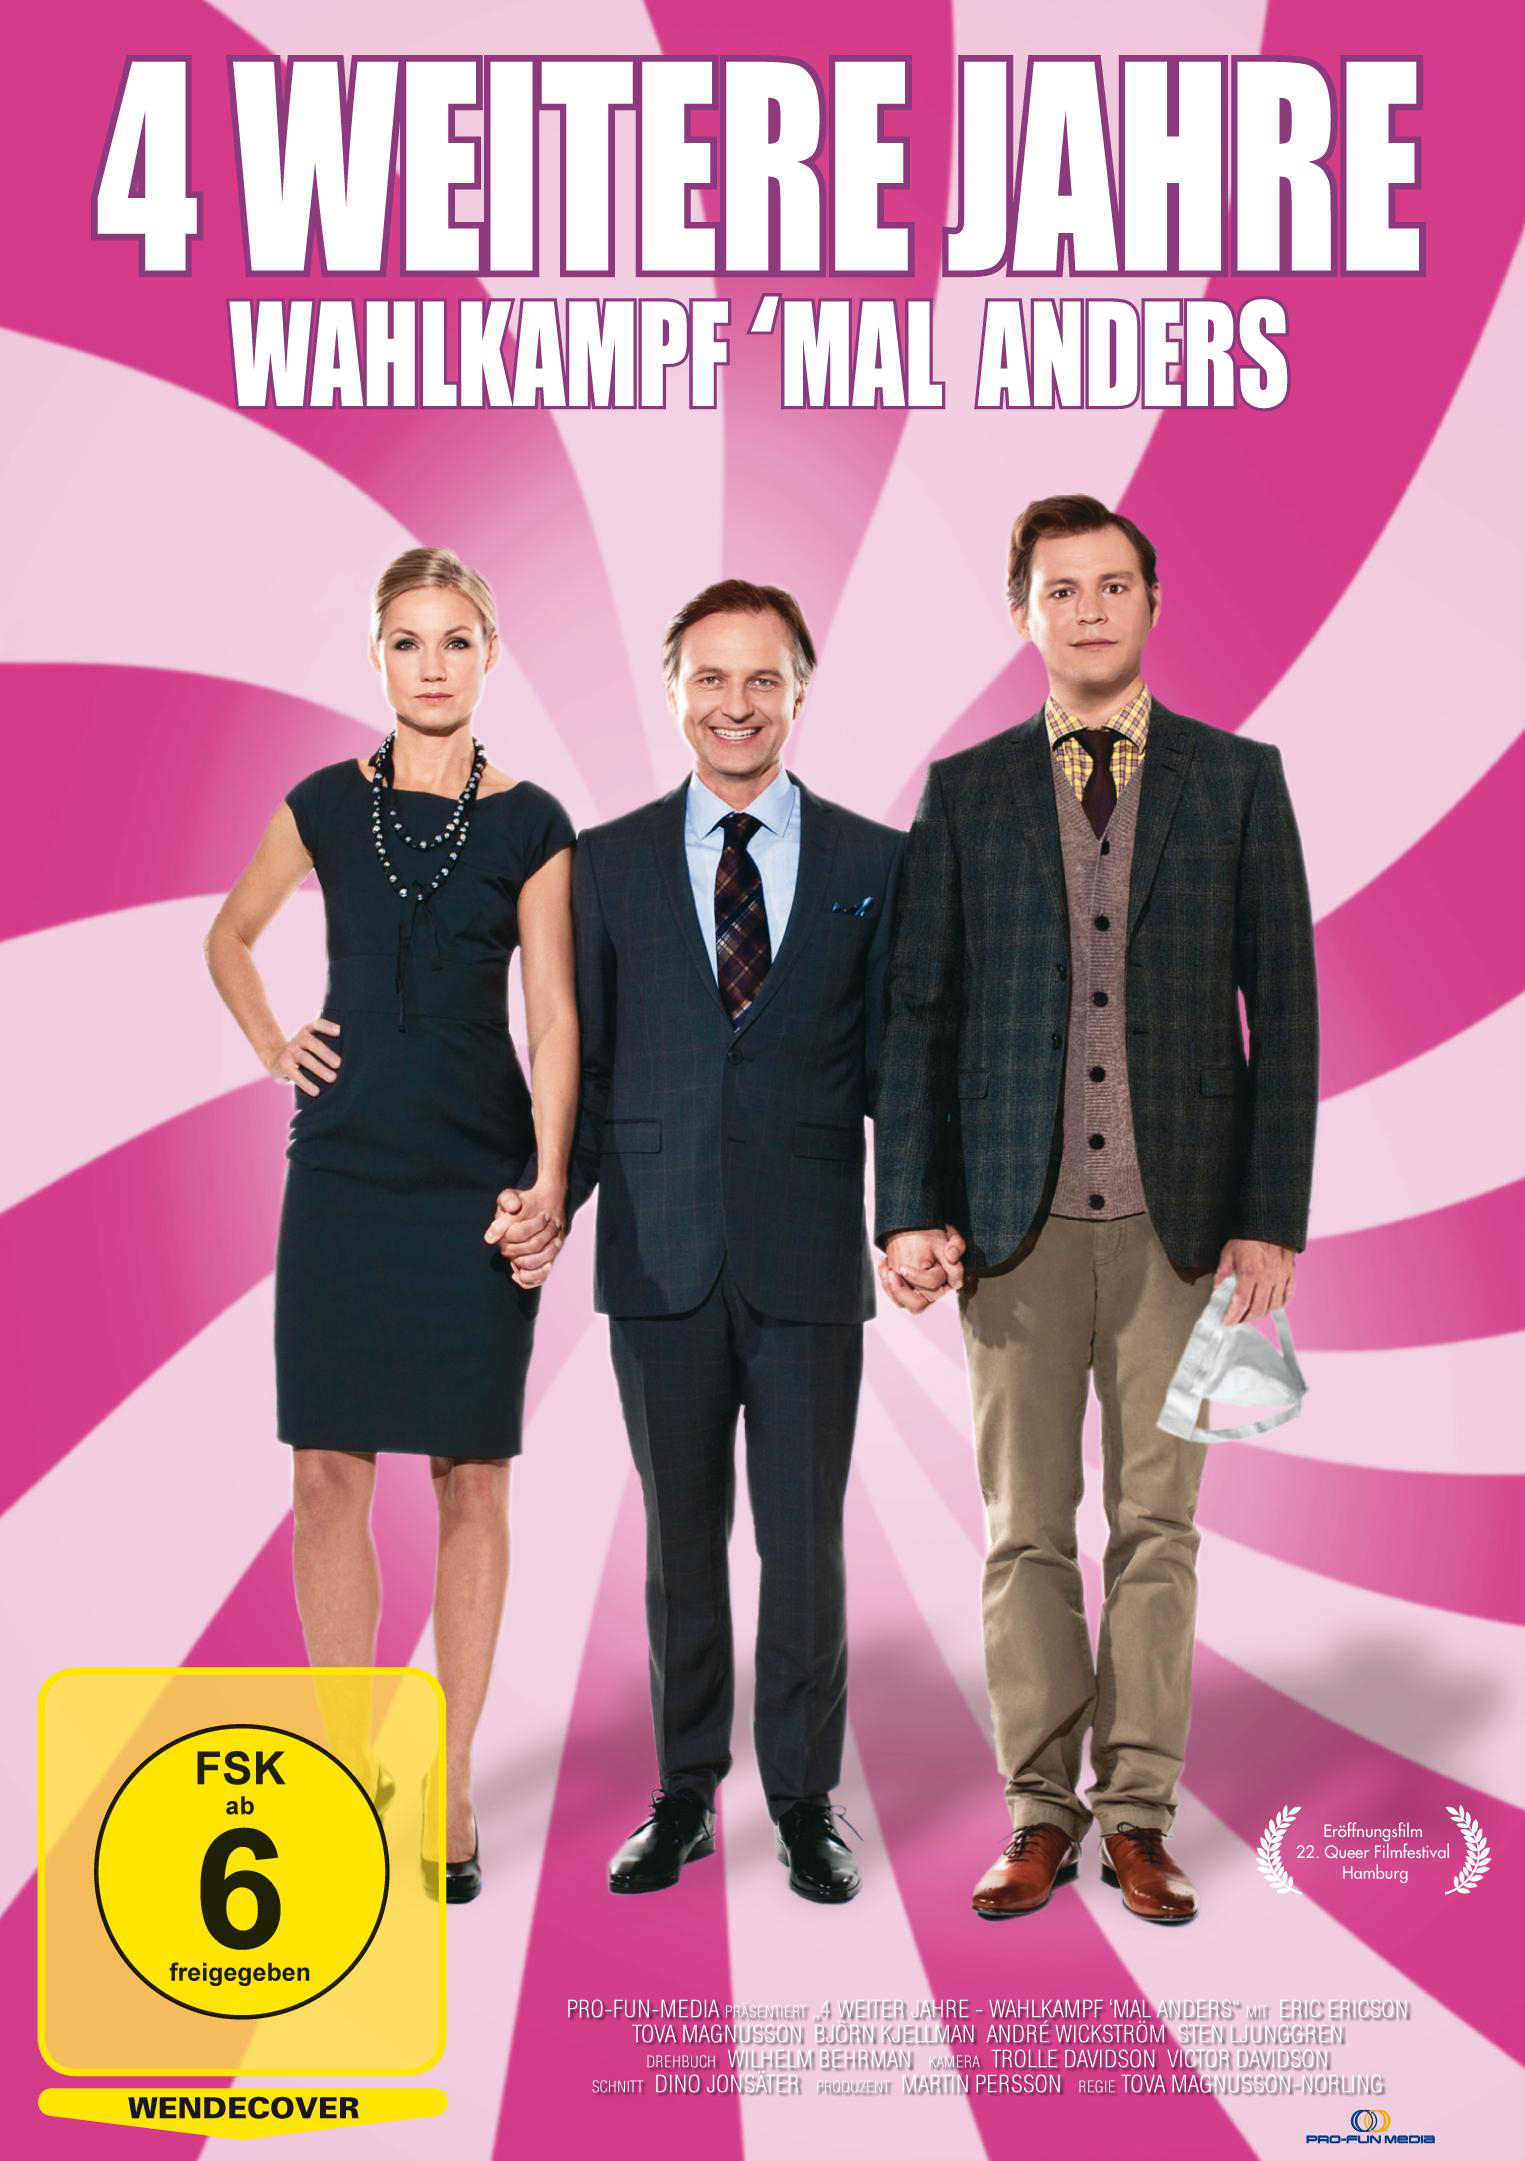 4 Wahlkampf weitere Jahre anders DVD \'mal -